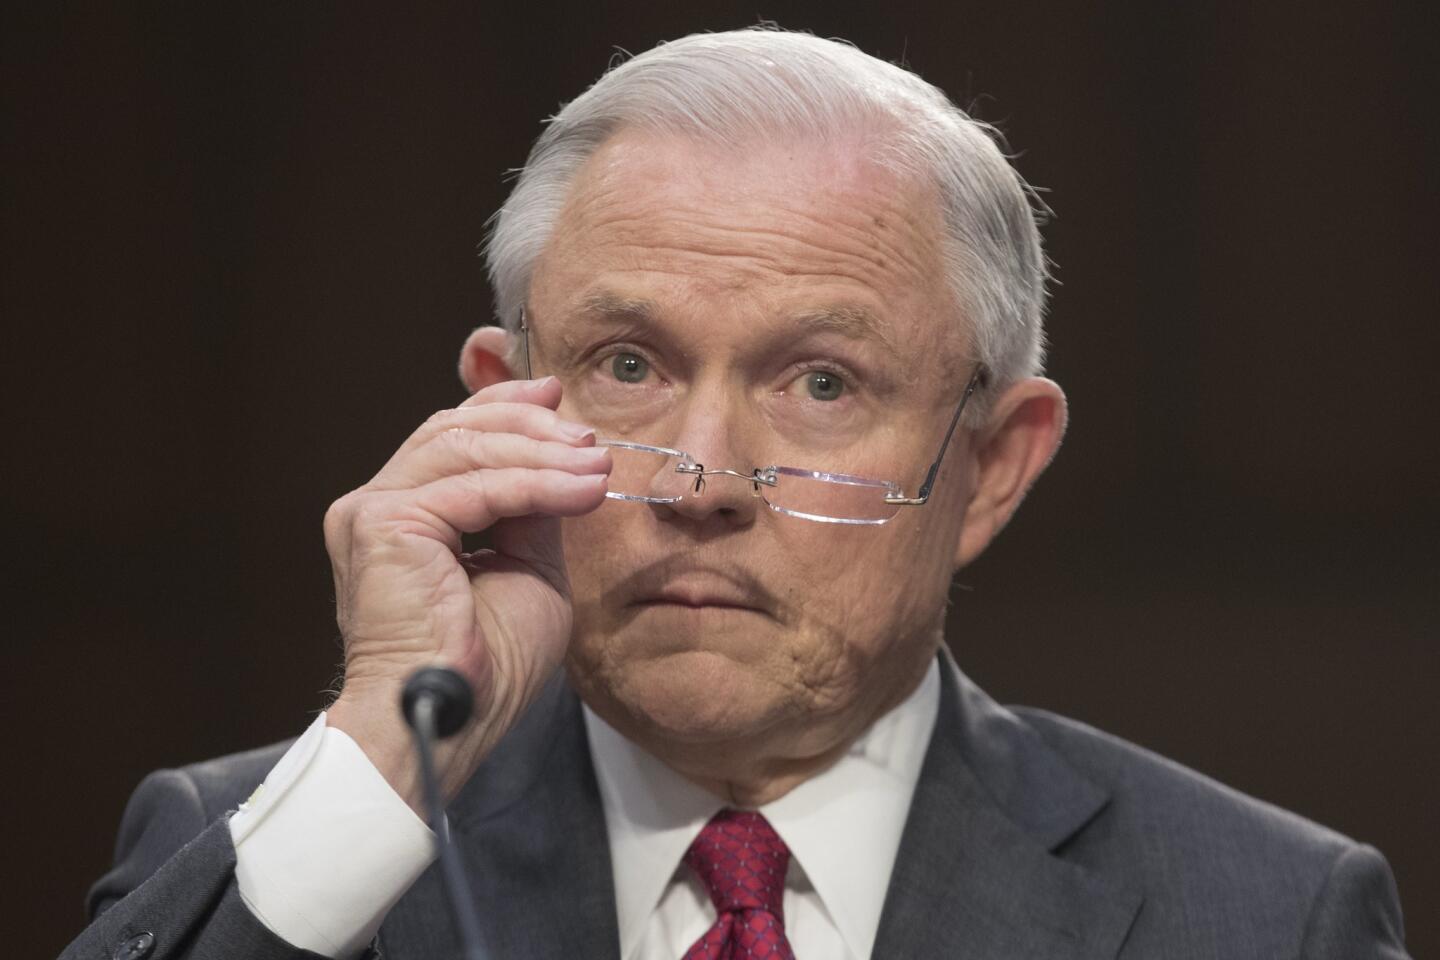 Attorney General Jeff Sessions puts on his glasses while testifying before the Senate intelligence committee on the FBI's investigation into the Trump administration and its possible collusion with Russia during the presidential campaign June 13, 2017.